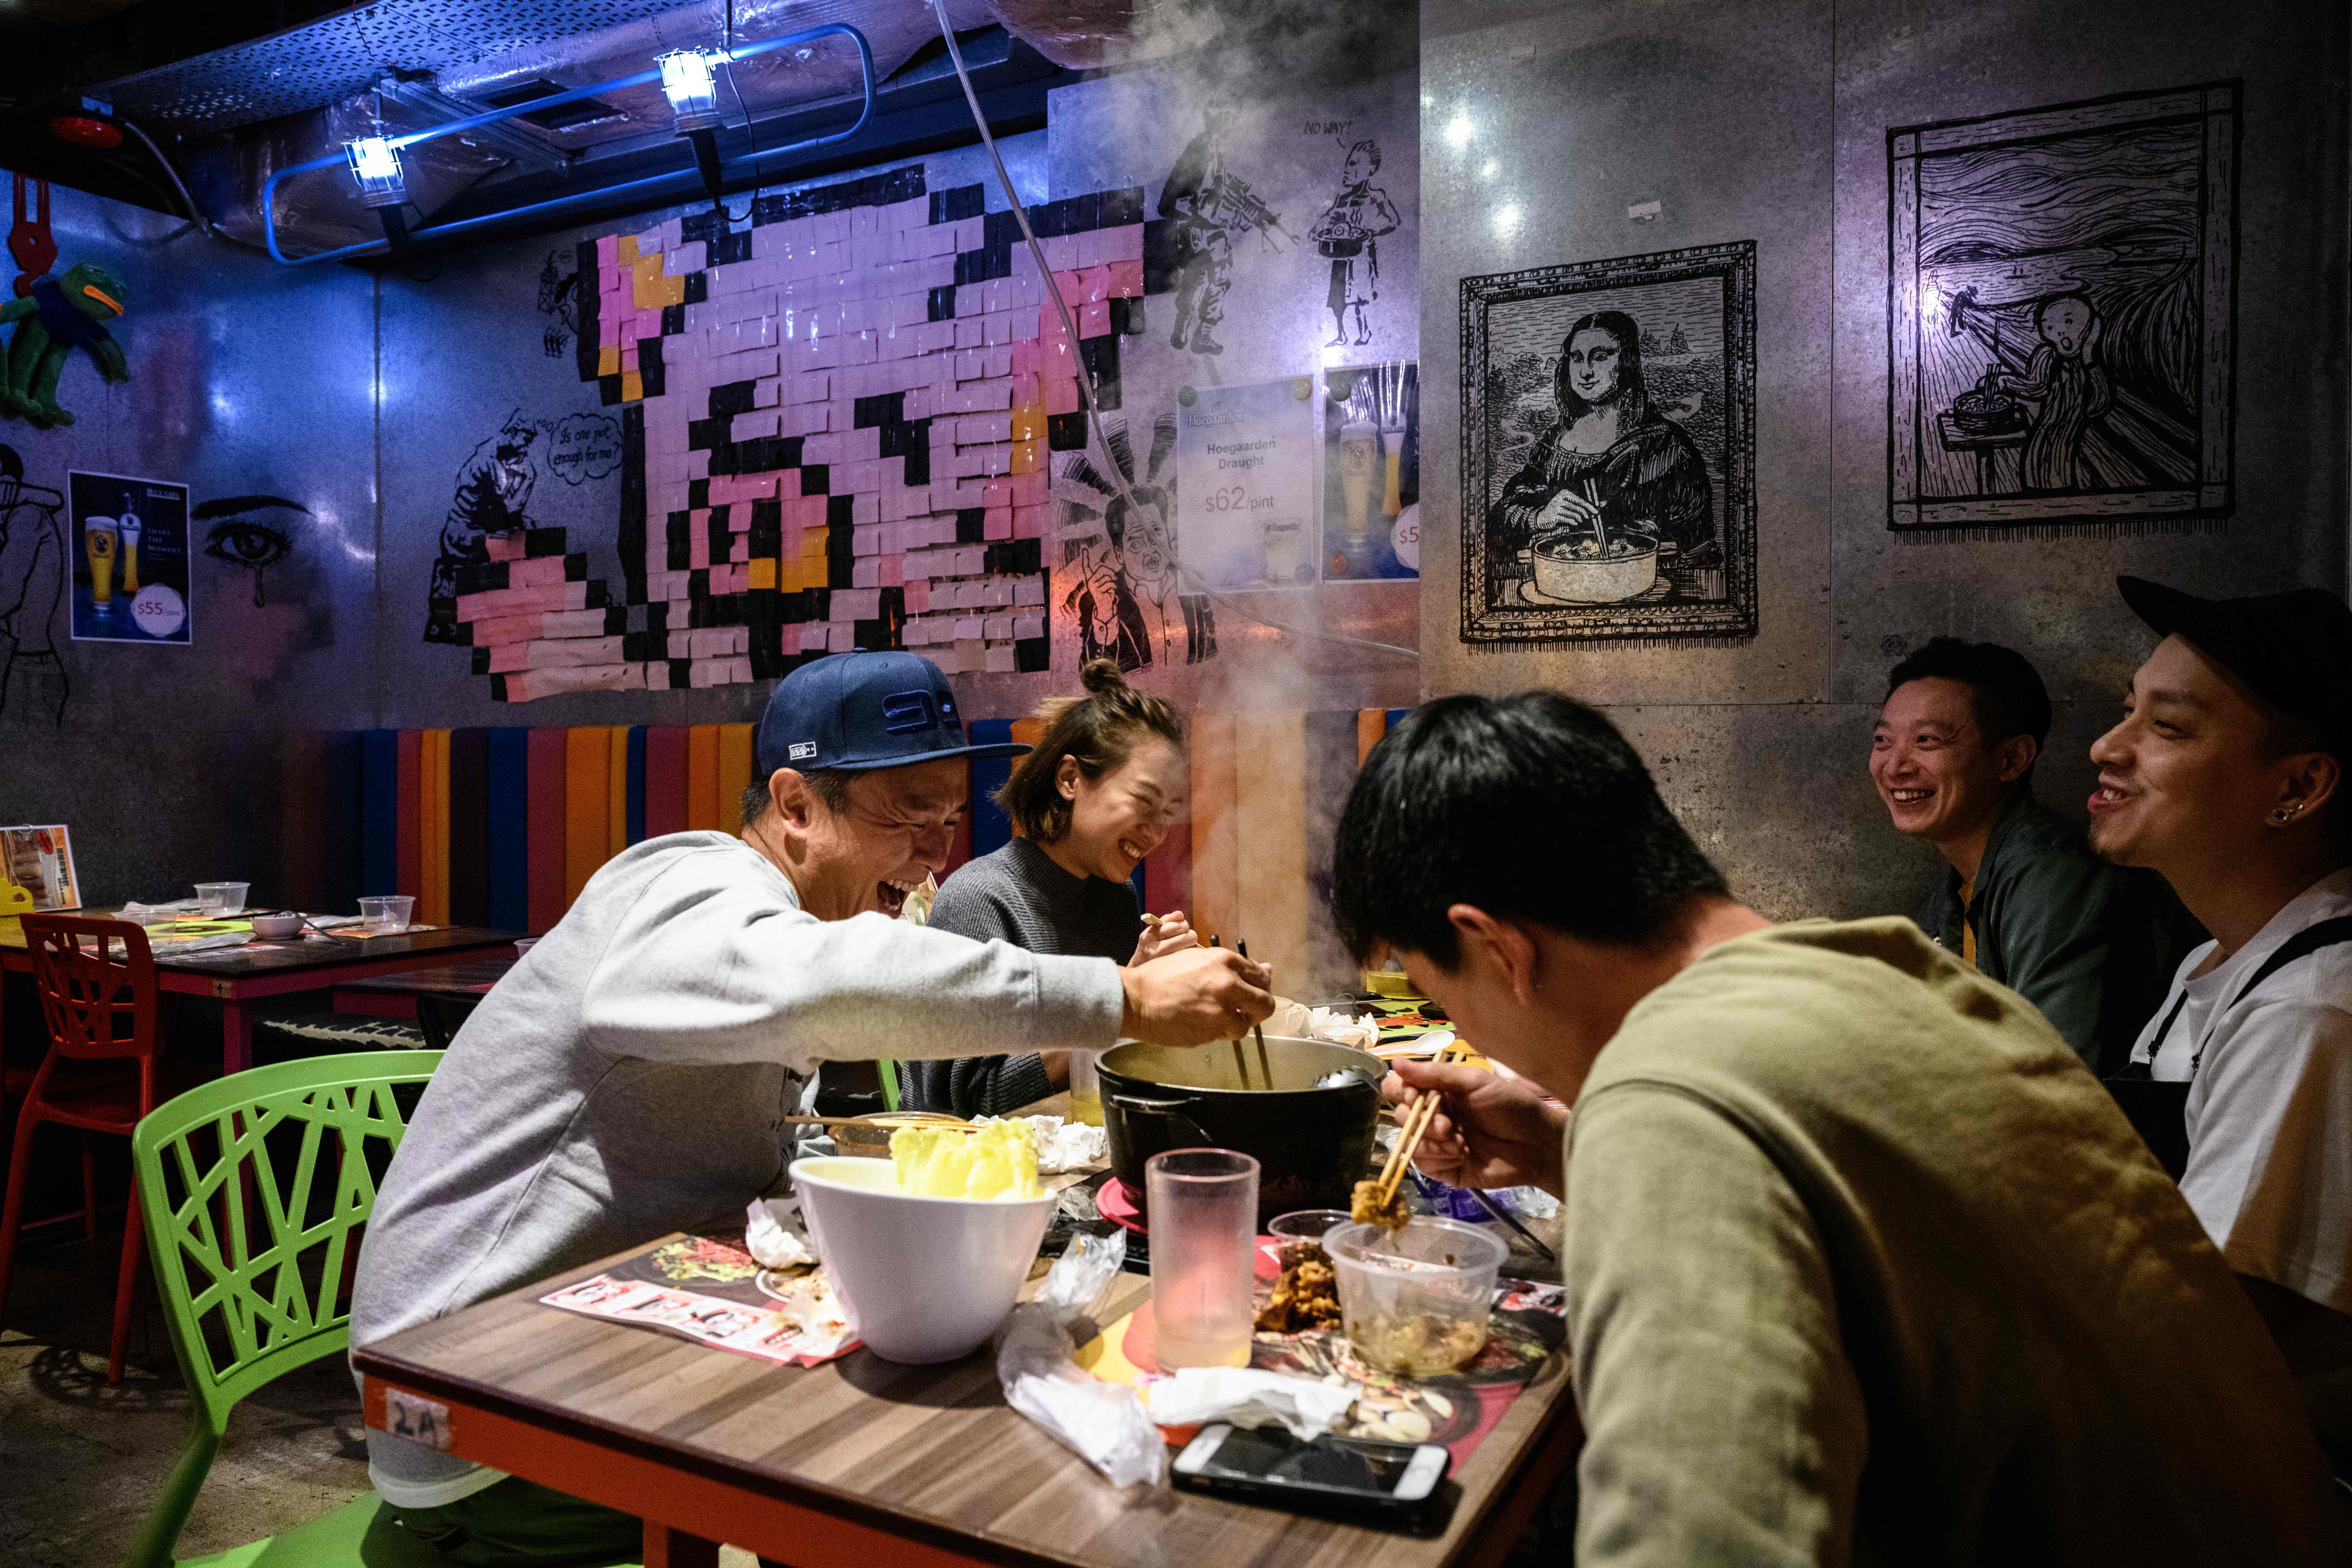 File: A hotpot concept restaurant in Hong Kong. A man threw soup at a Chinese woman at a hotpot restaurant on 29 March